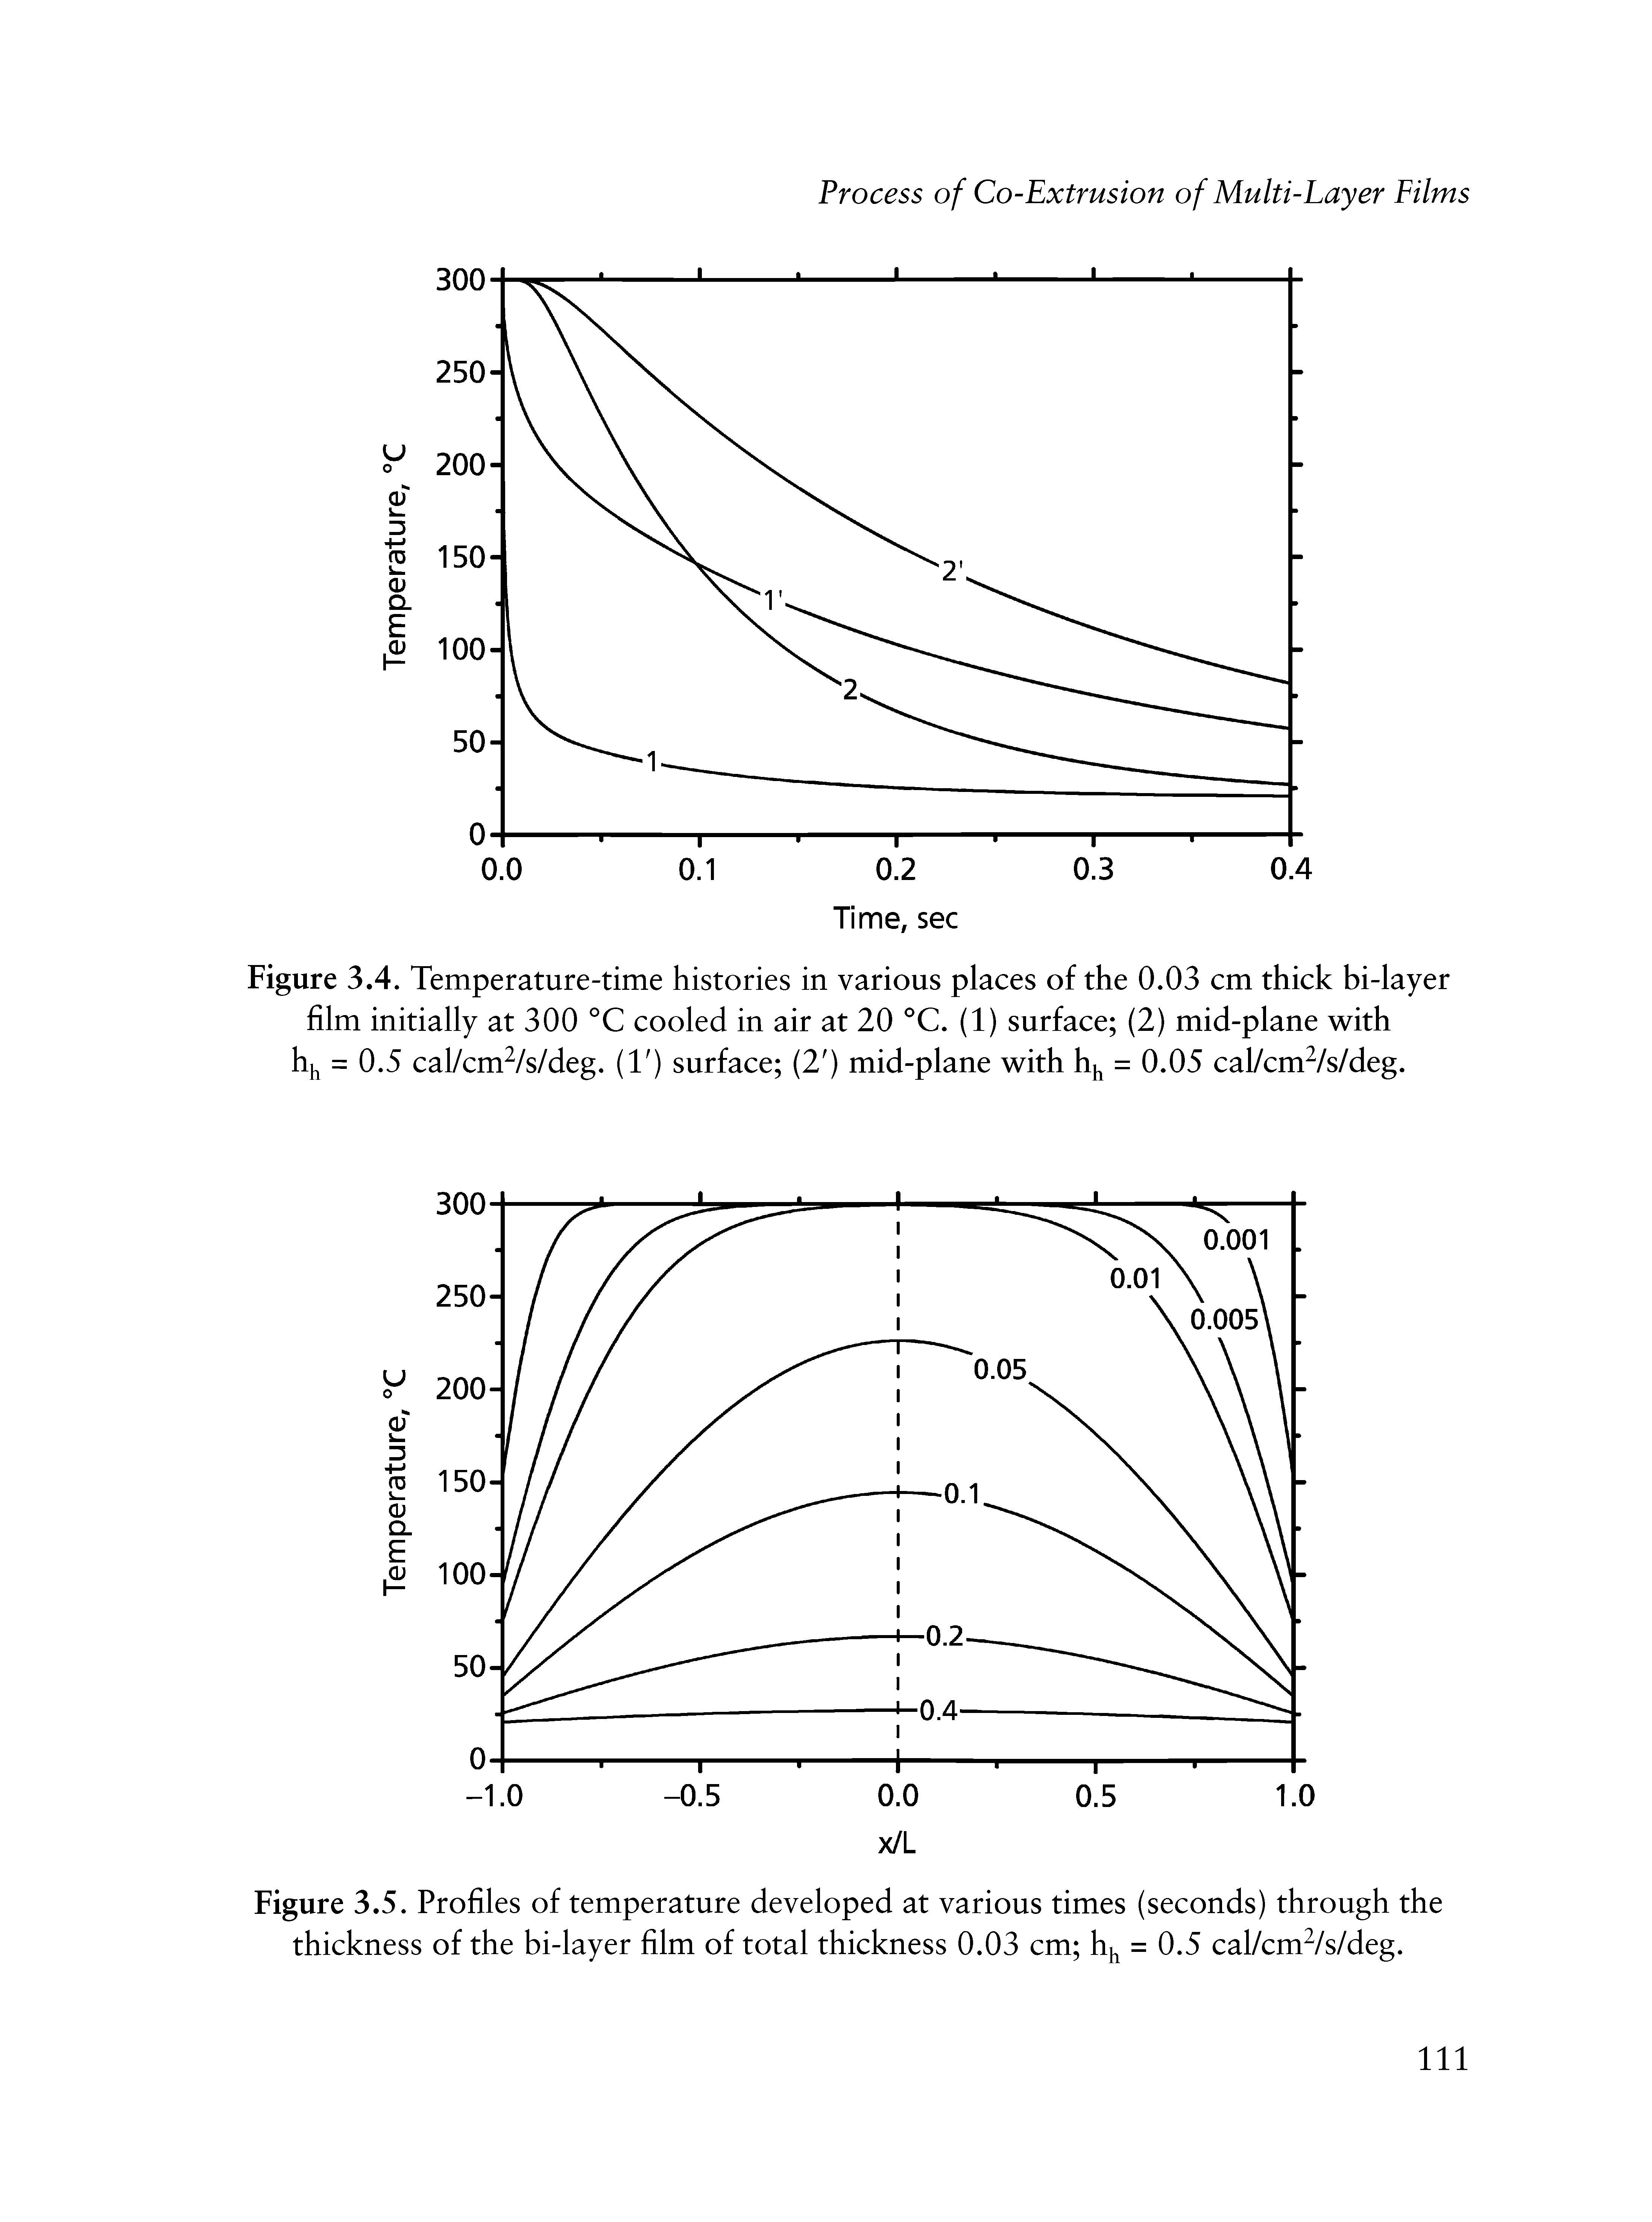 Figure 3.5. Profiles of temperature developed at various times (seconds) through the thickness of the bi-layer film of total thickness 0.03 cm hj = 0.5 cal/cm /s/deg.